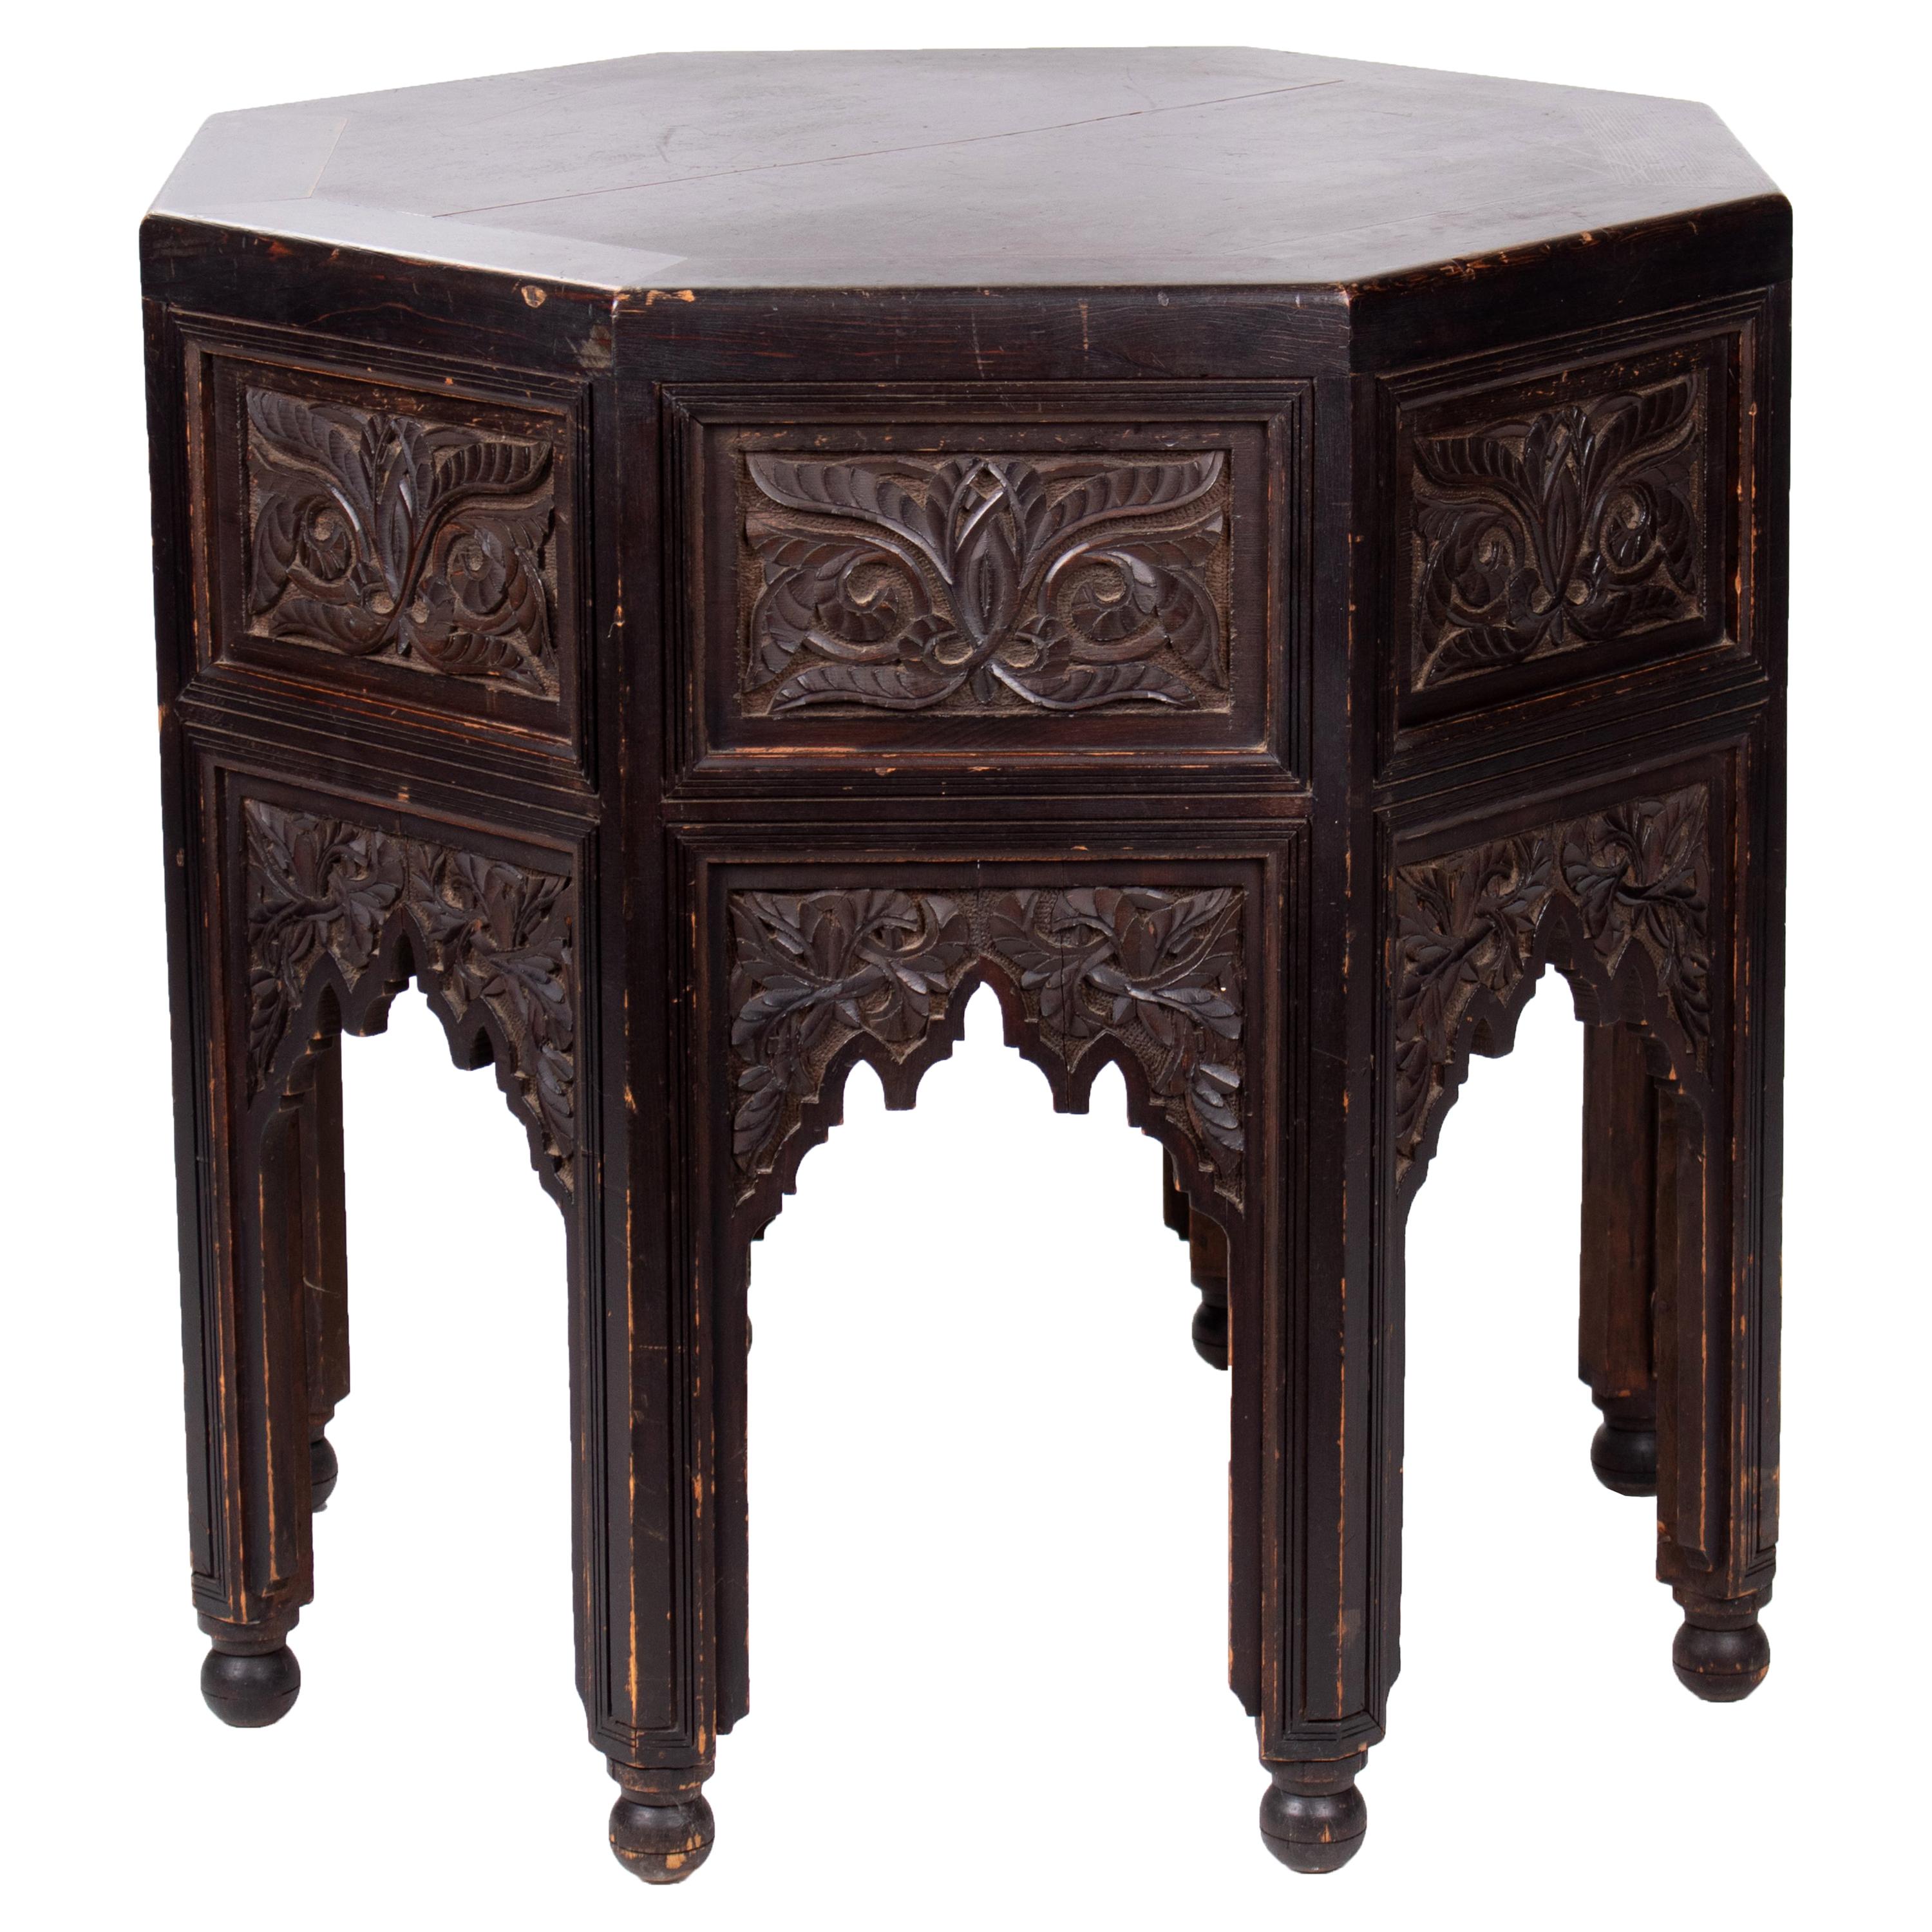 1930s Turkish Octagonal Hand Carved Wooden Table